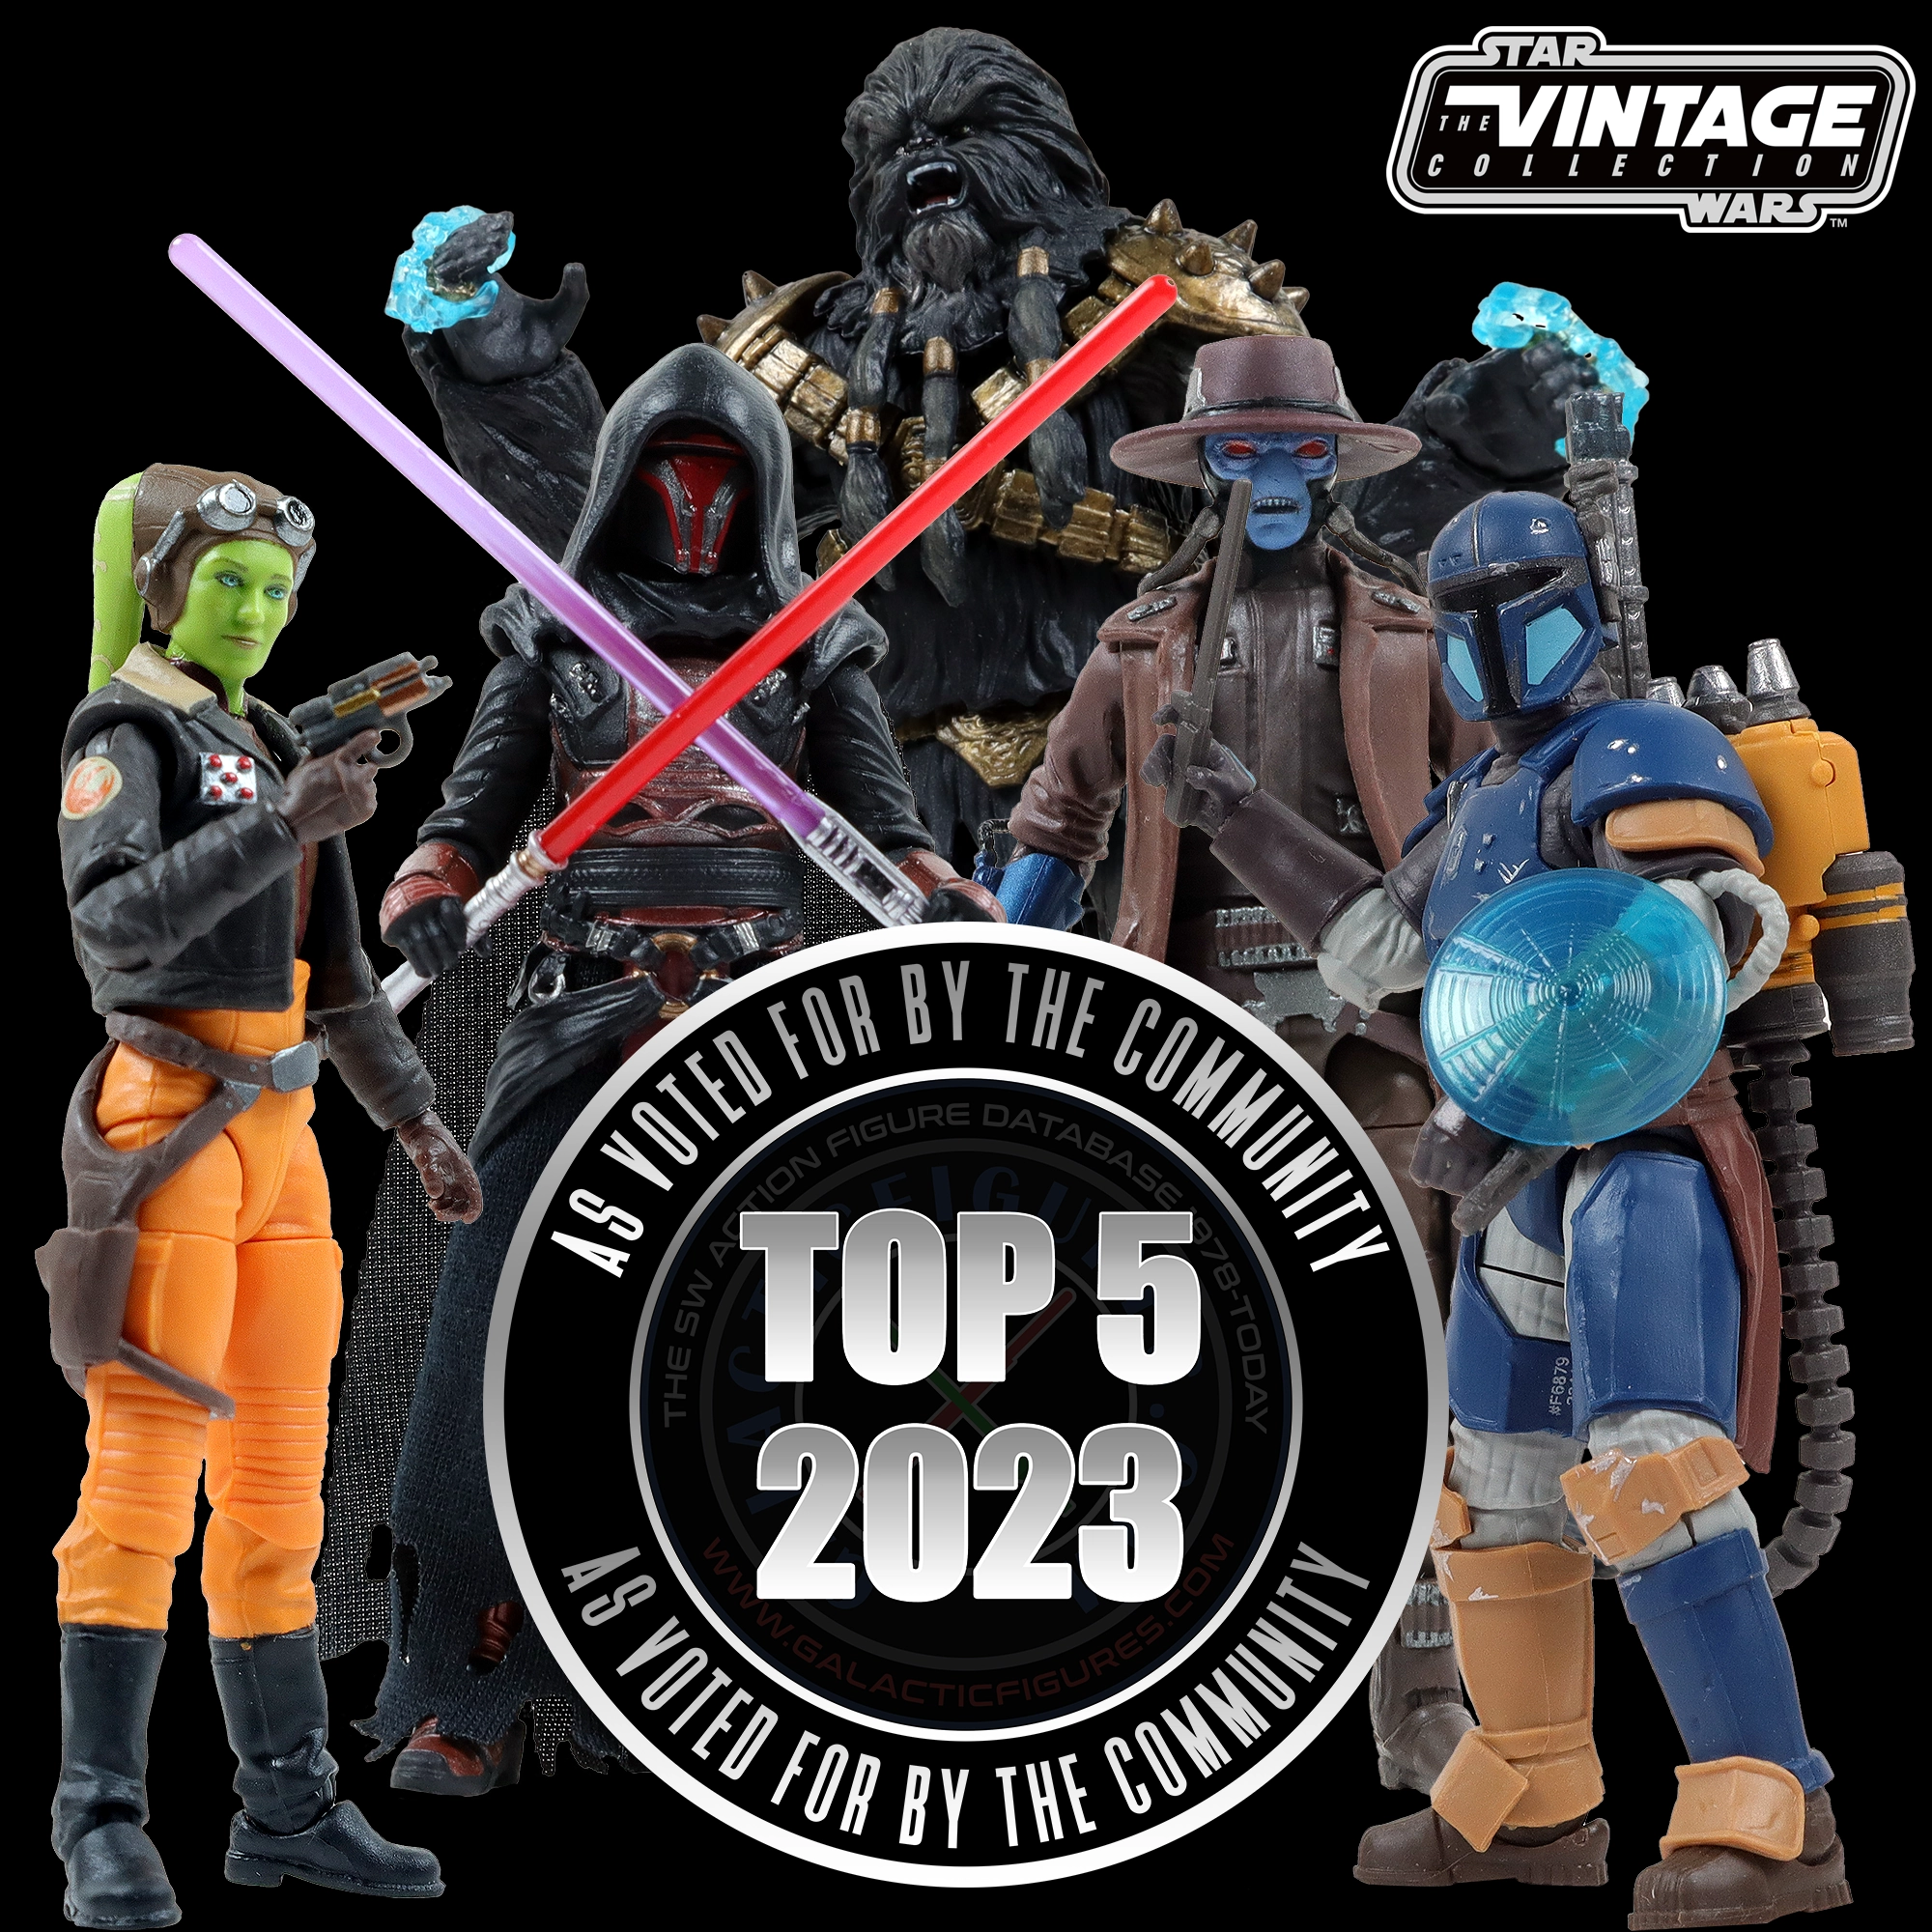 Here Are The TOP 5 Vintage Collection And Black Series Figures For 2023!